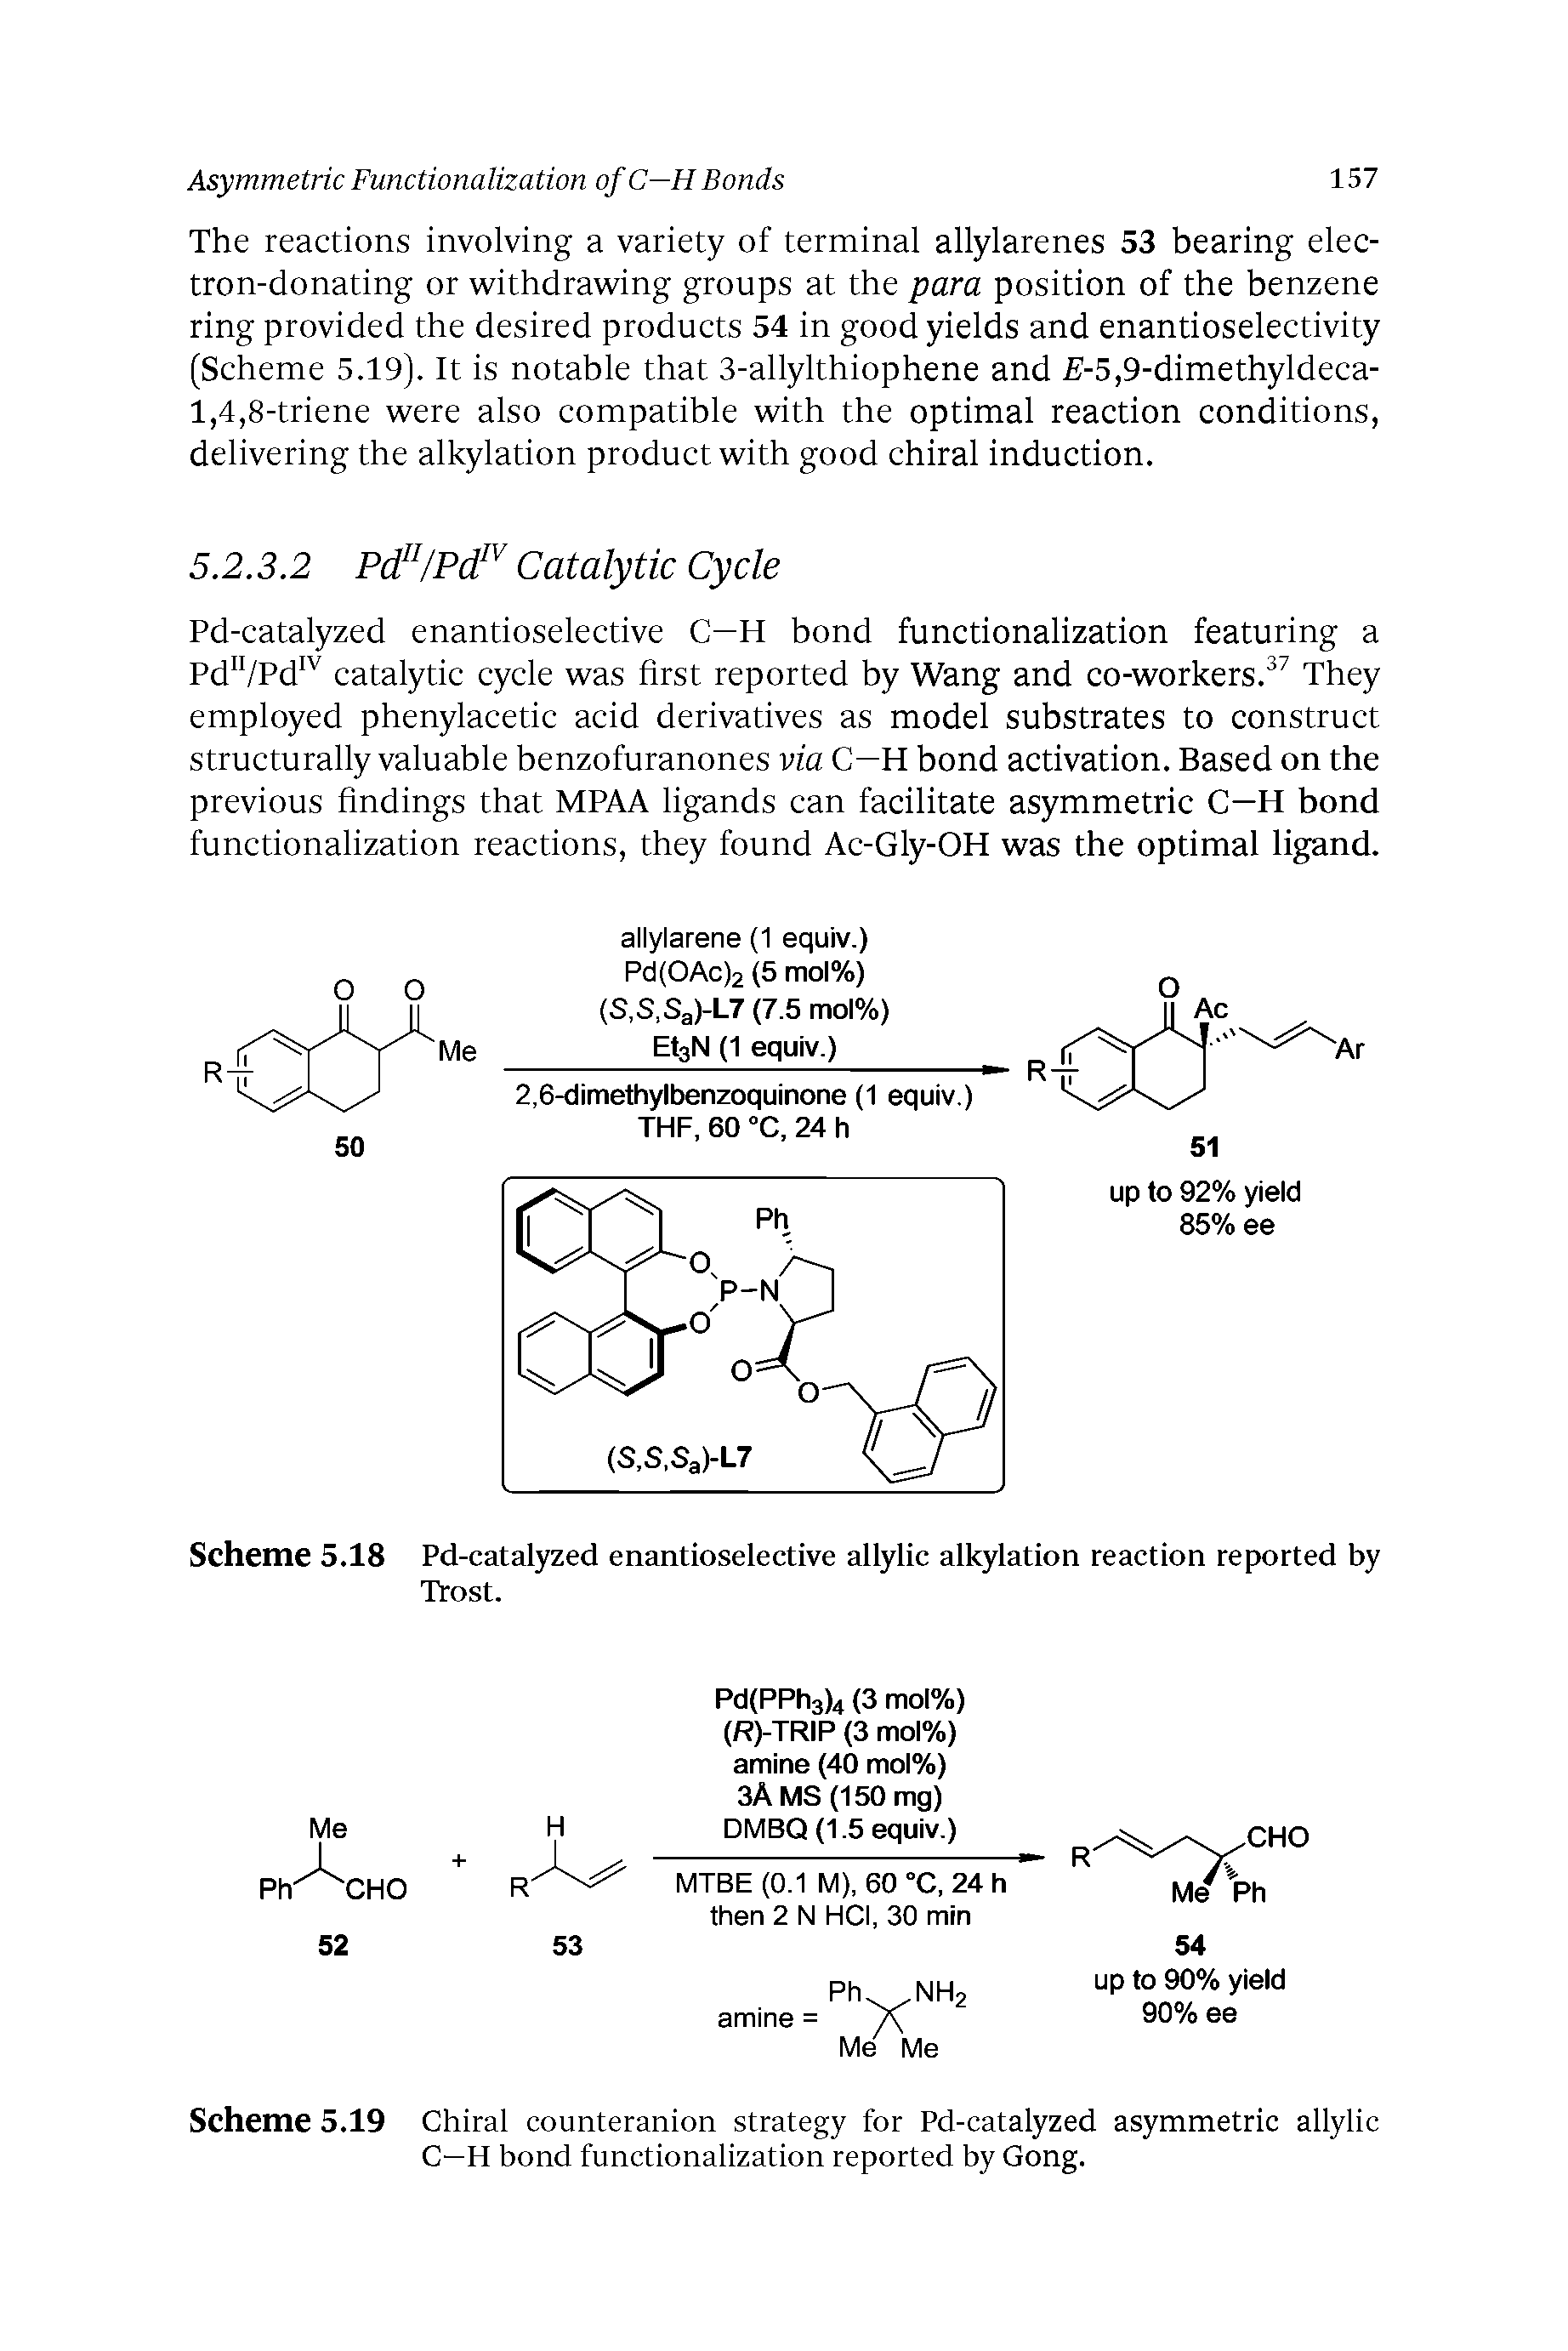 Scheme 5.19 Chiral counteranion strategy for Pd-catalyzed asymmetric allylic C—H bond functionalization reported by Gong.